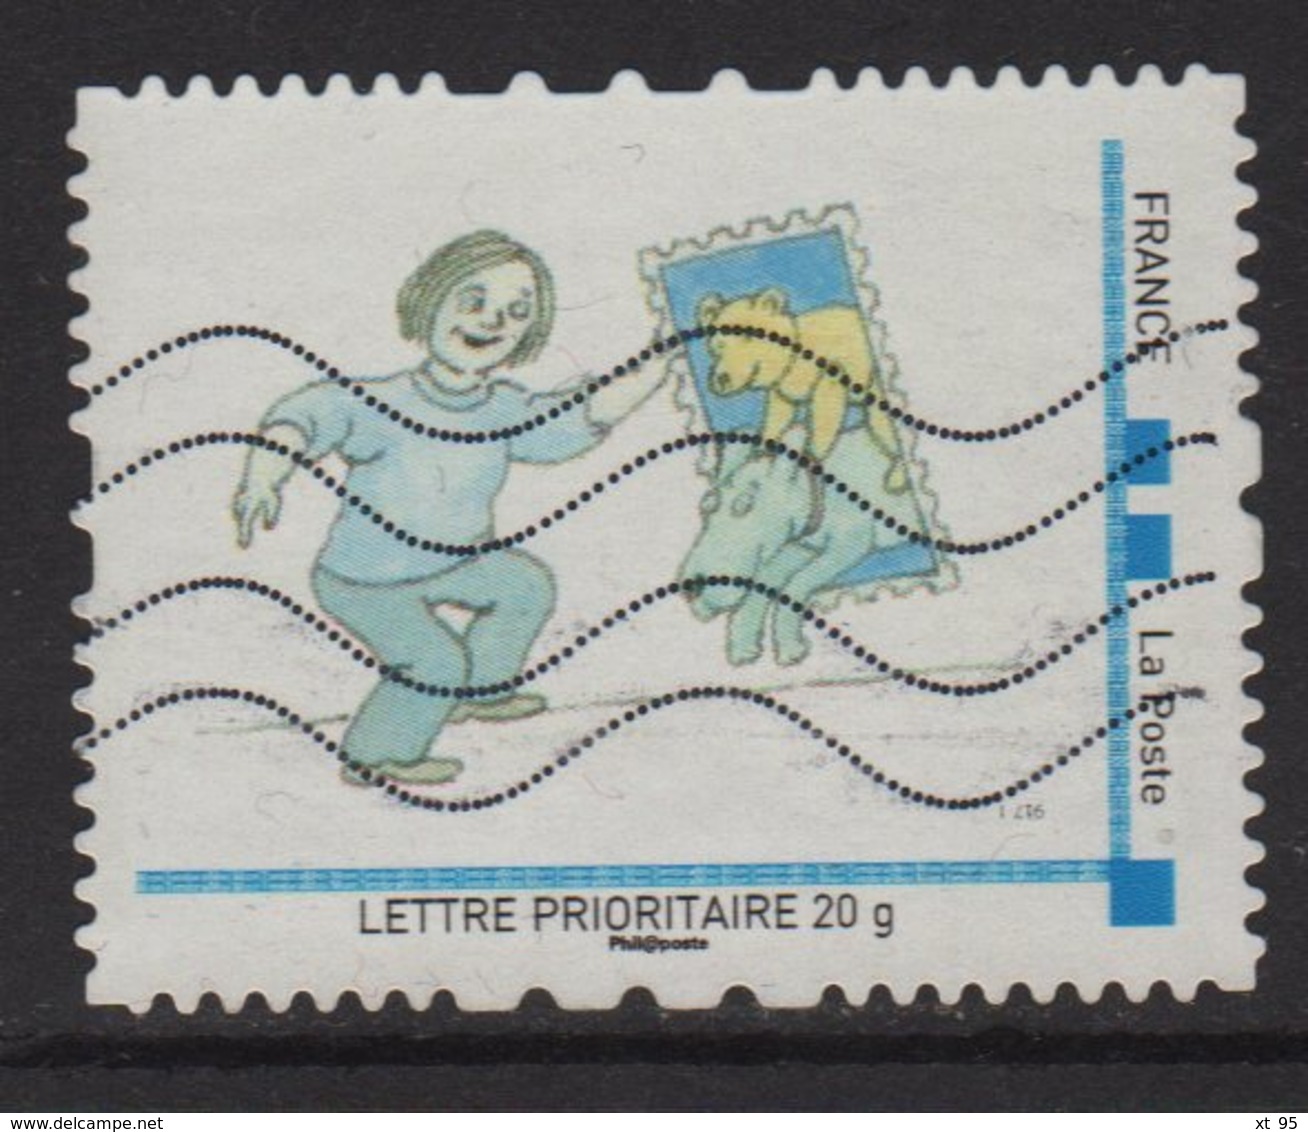 Timbre Personnalise Oblitere - Lettre Prioritaire 20g - Collectionnez Les Timbres - Used Stamps